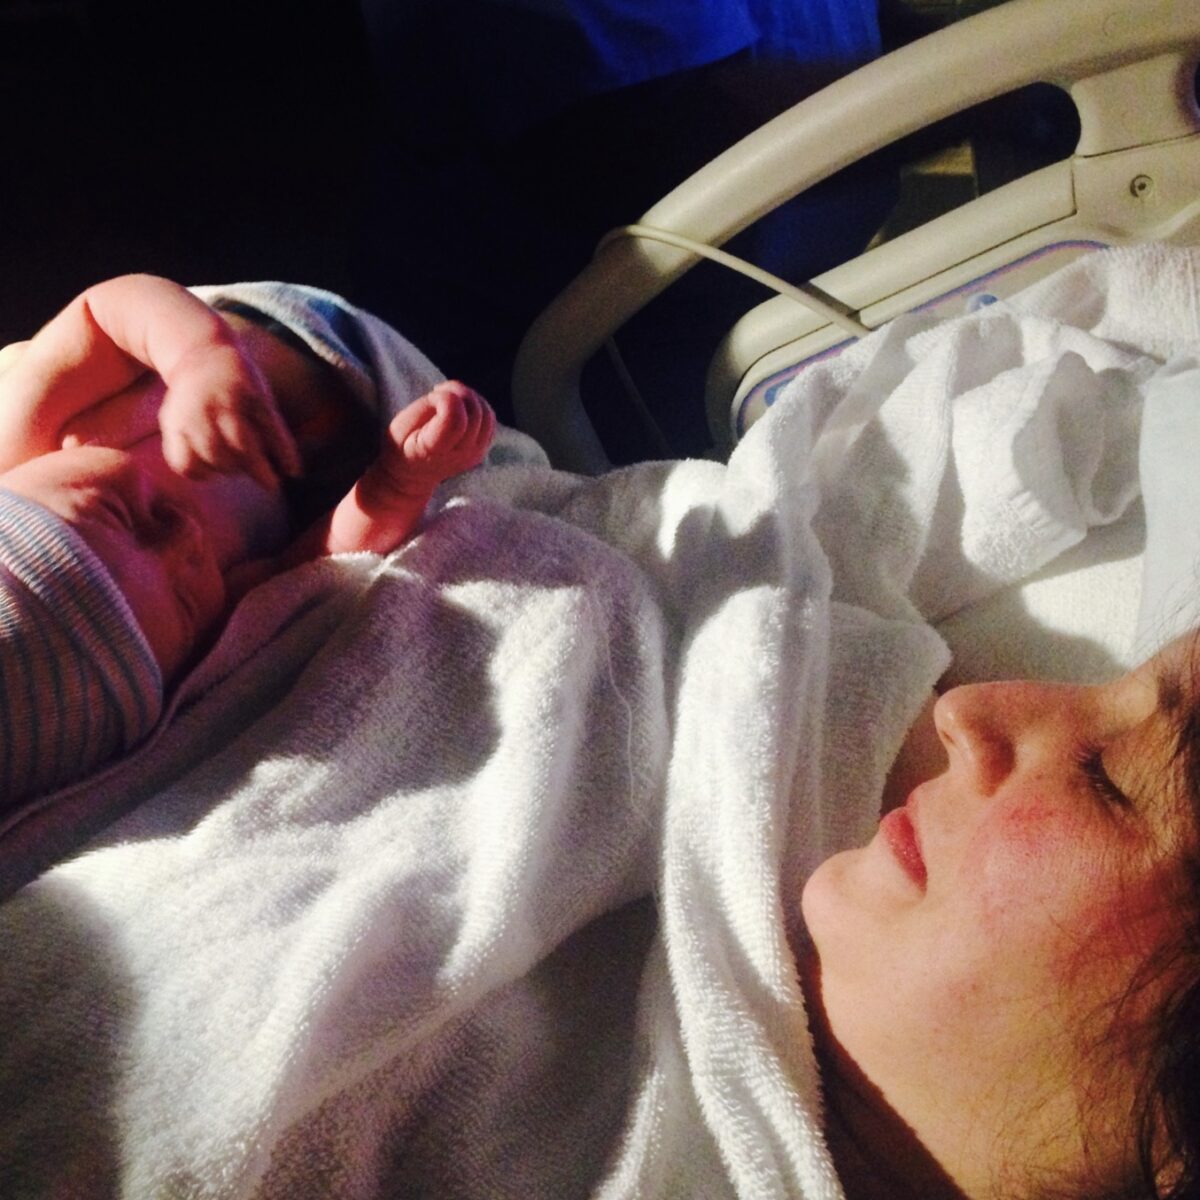 The author stares at her newborn baby minutes after birth.